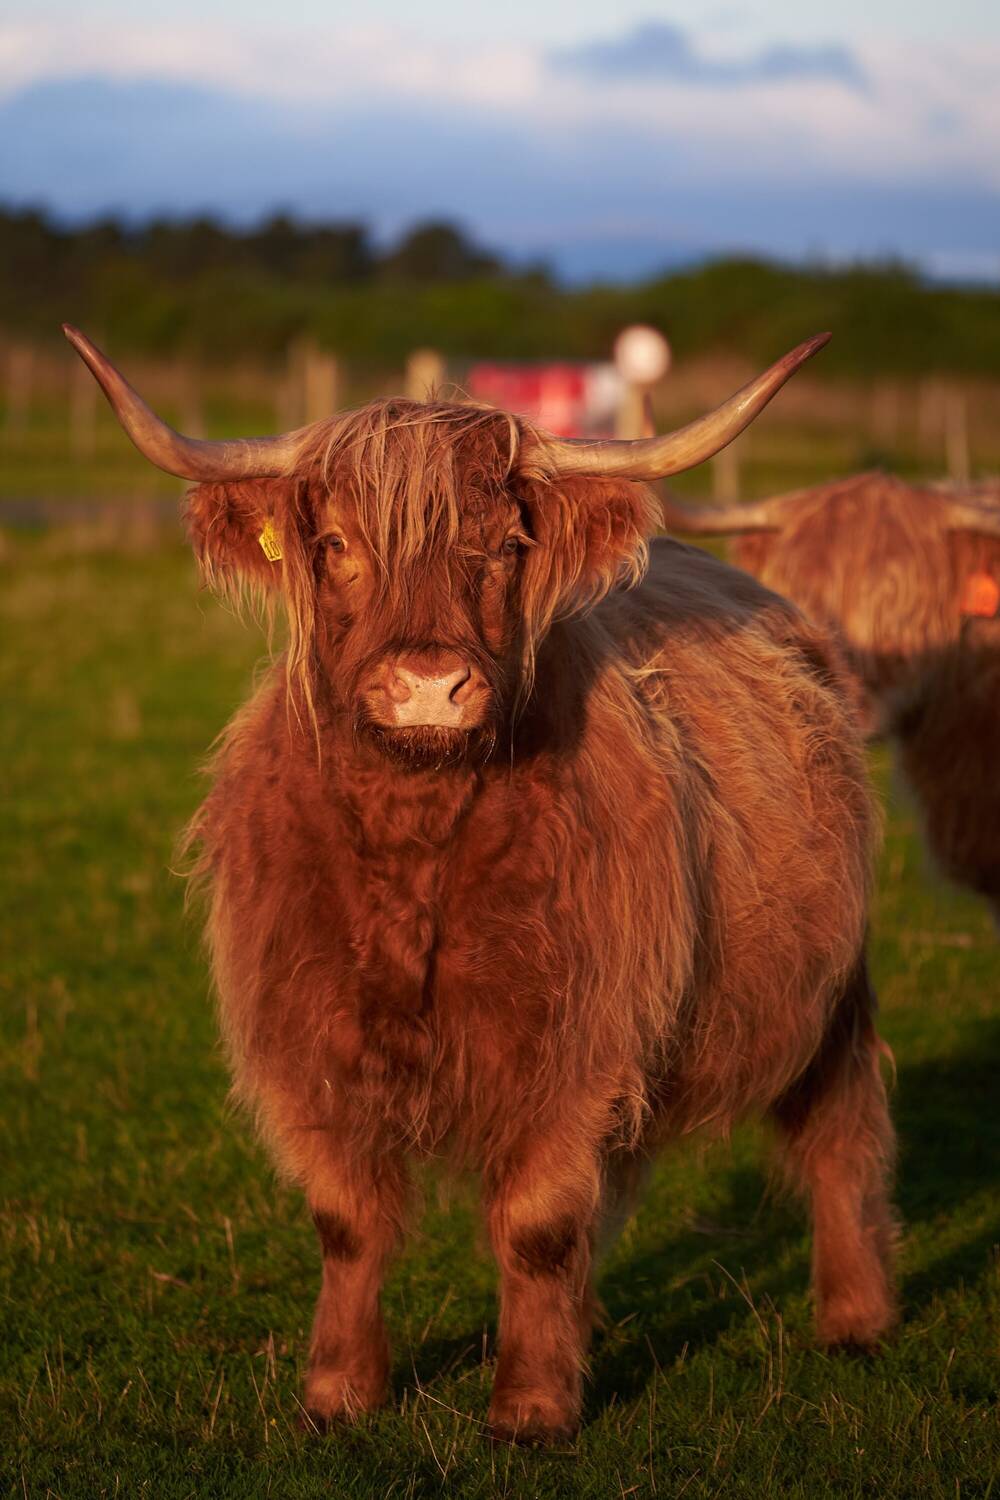 A Highland cow standing in a green field, with another Highland cow in the background.